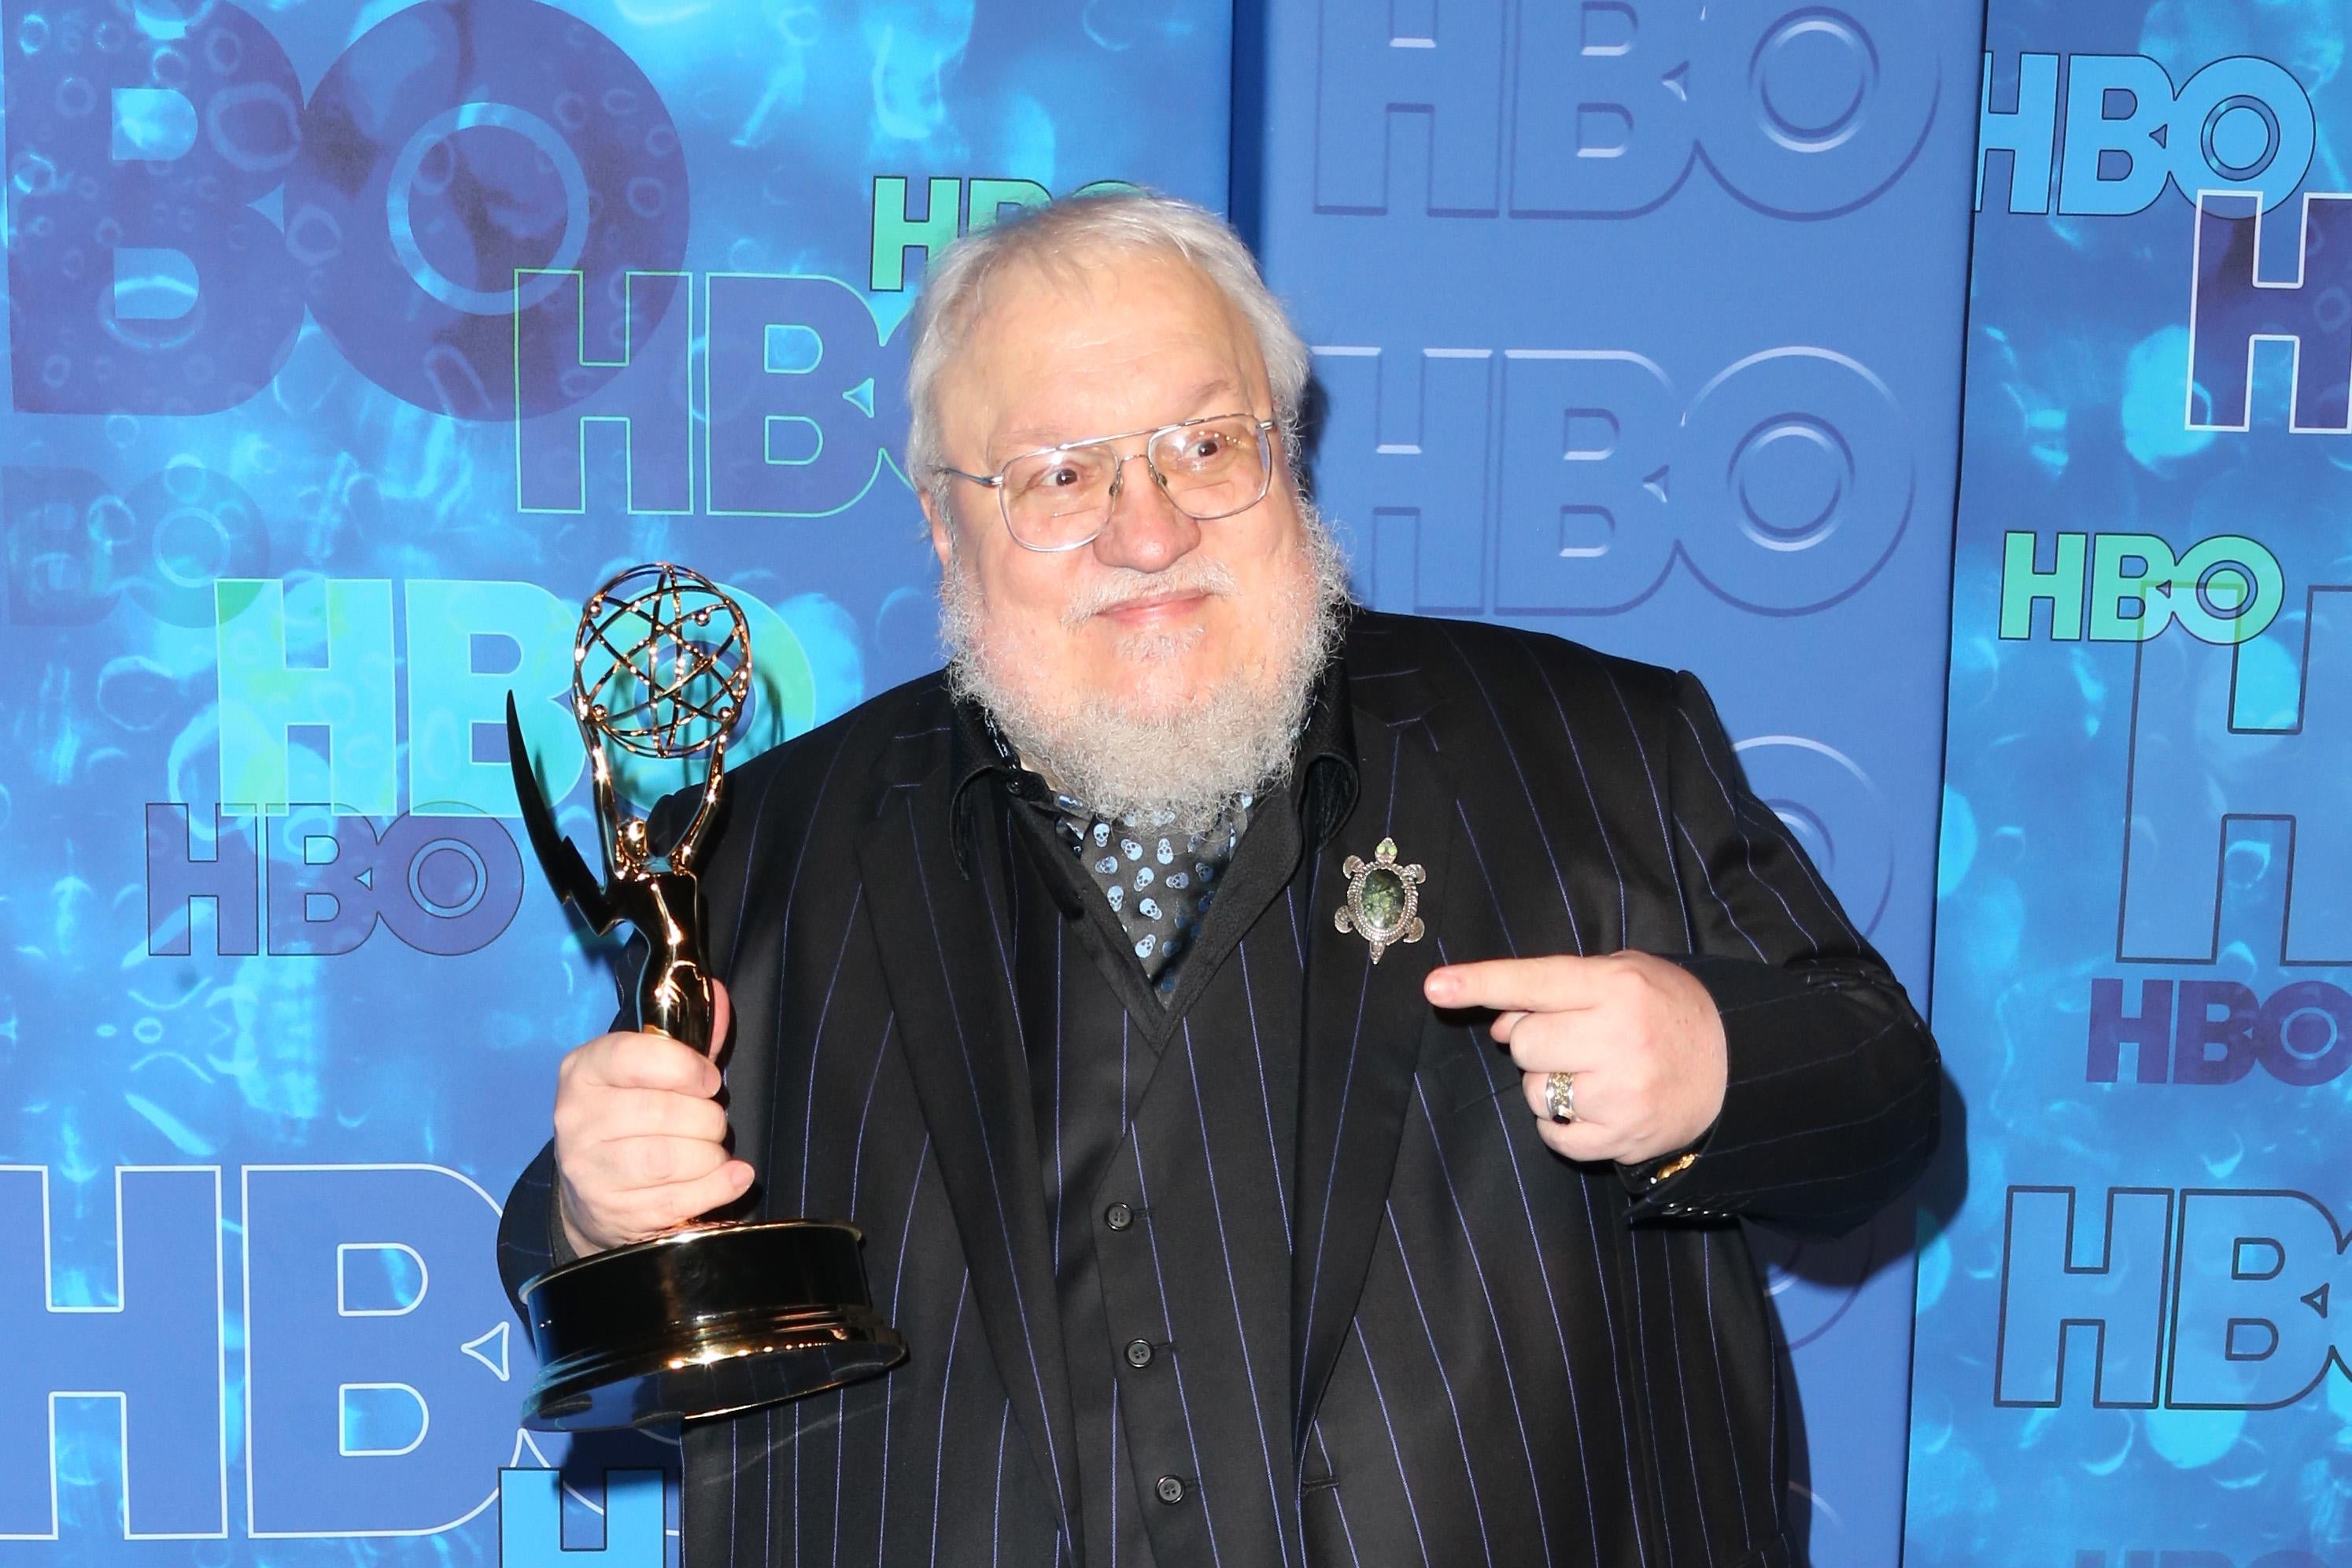 Author George R. R. Martin attends HBO's Official 2016 Emmy After Party at The Plaza at the Pacific Design Center on September 18, 2016 in Los Angeles, California.